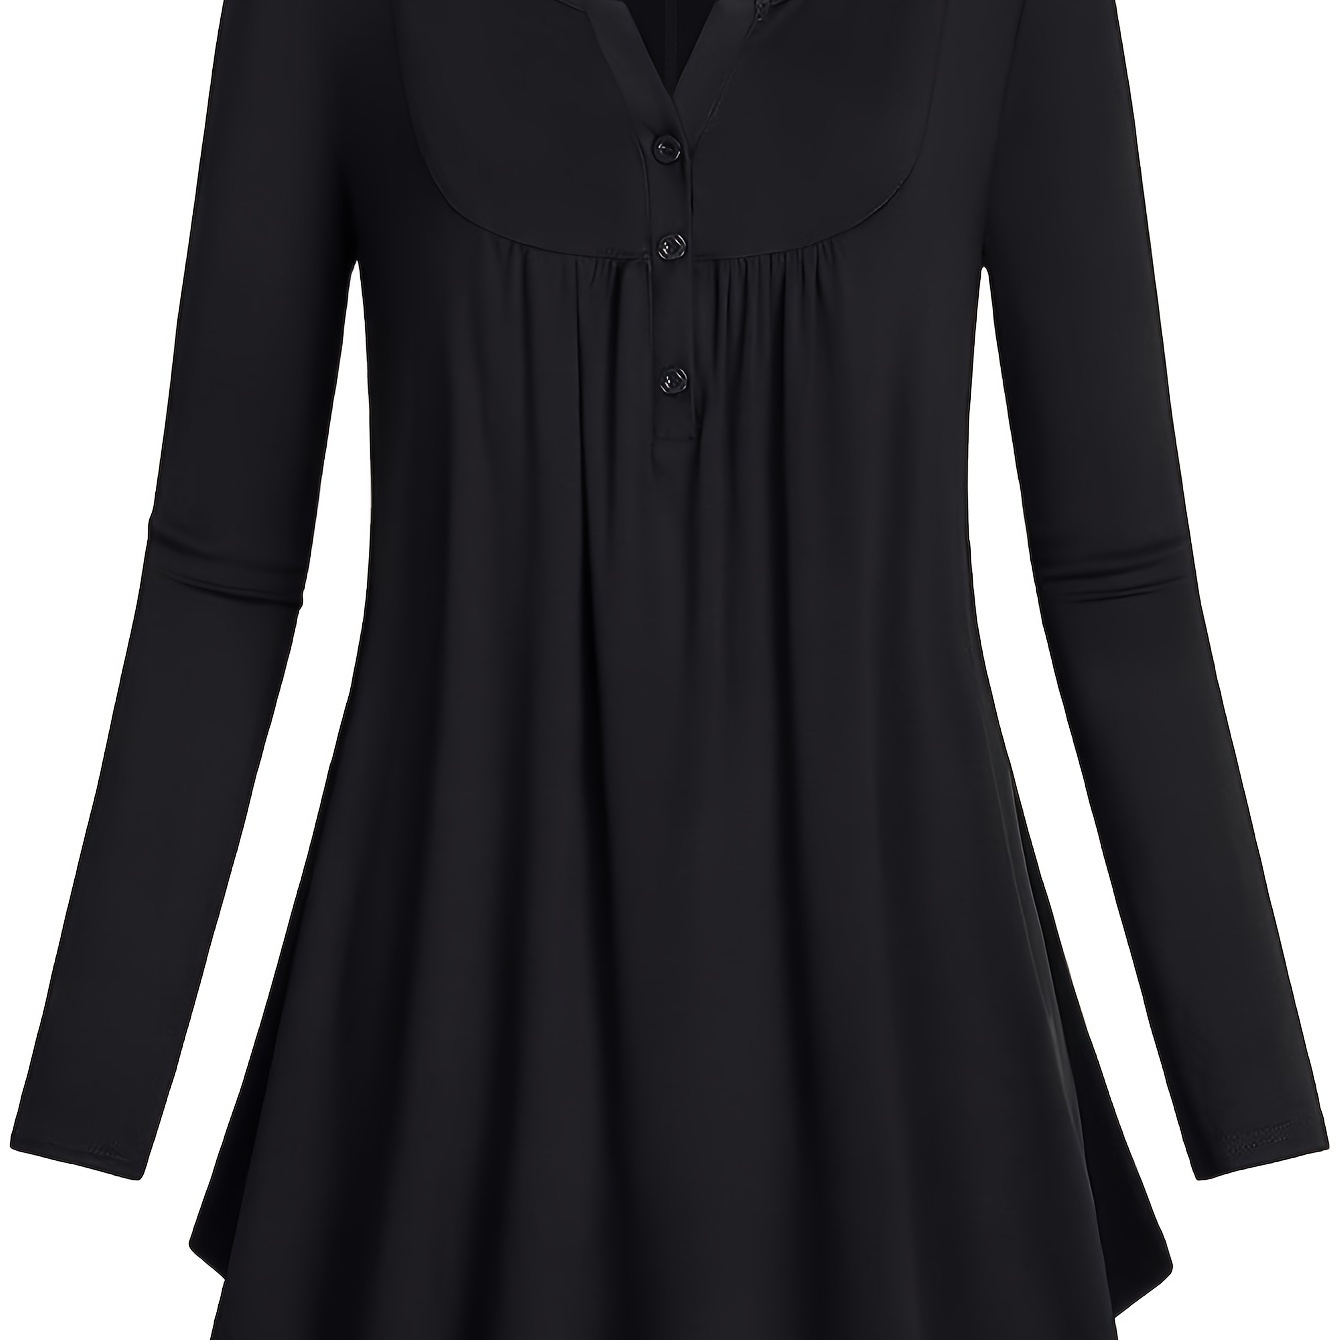 

Plus Size Elegant Top, Women's Plus Solid Long Sleeve Button Up Notched Neck Ruched Peplum Top